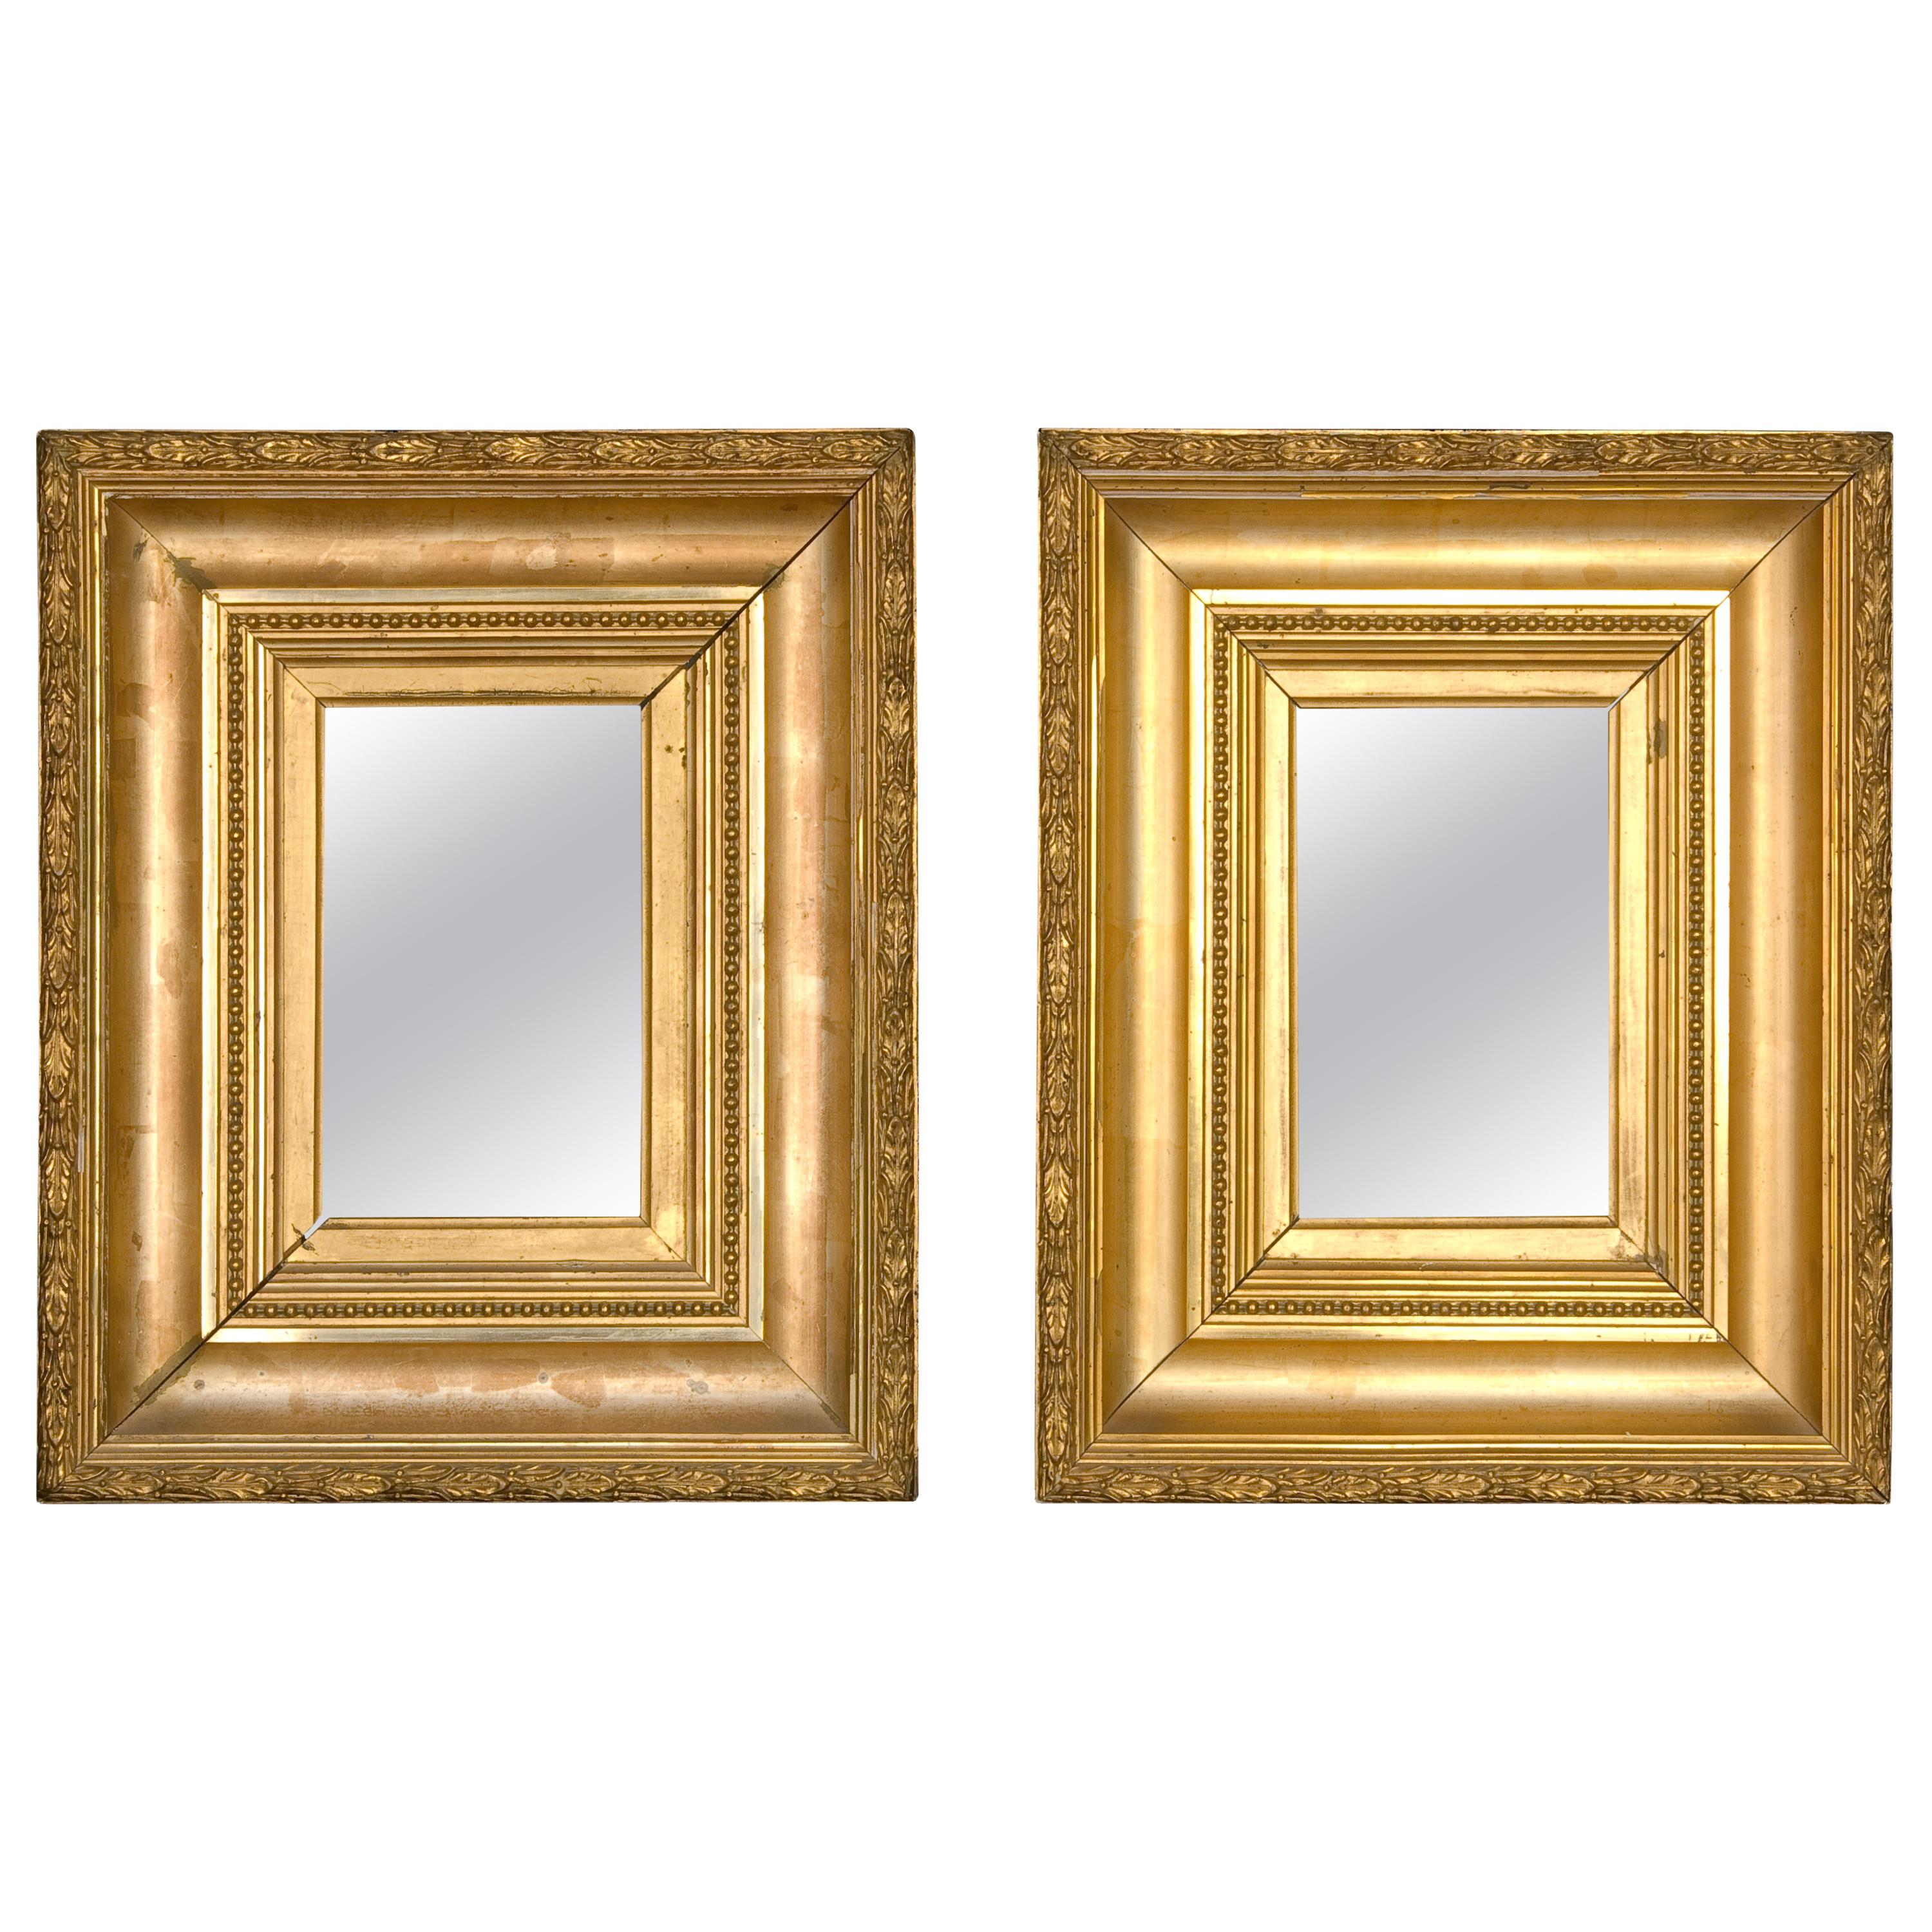 Pair of Frames, Wood, Stucco, 19th Century